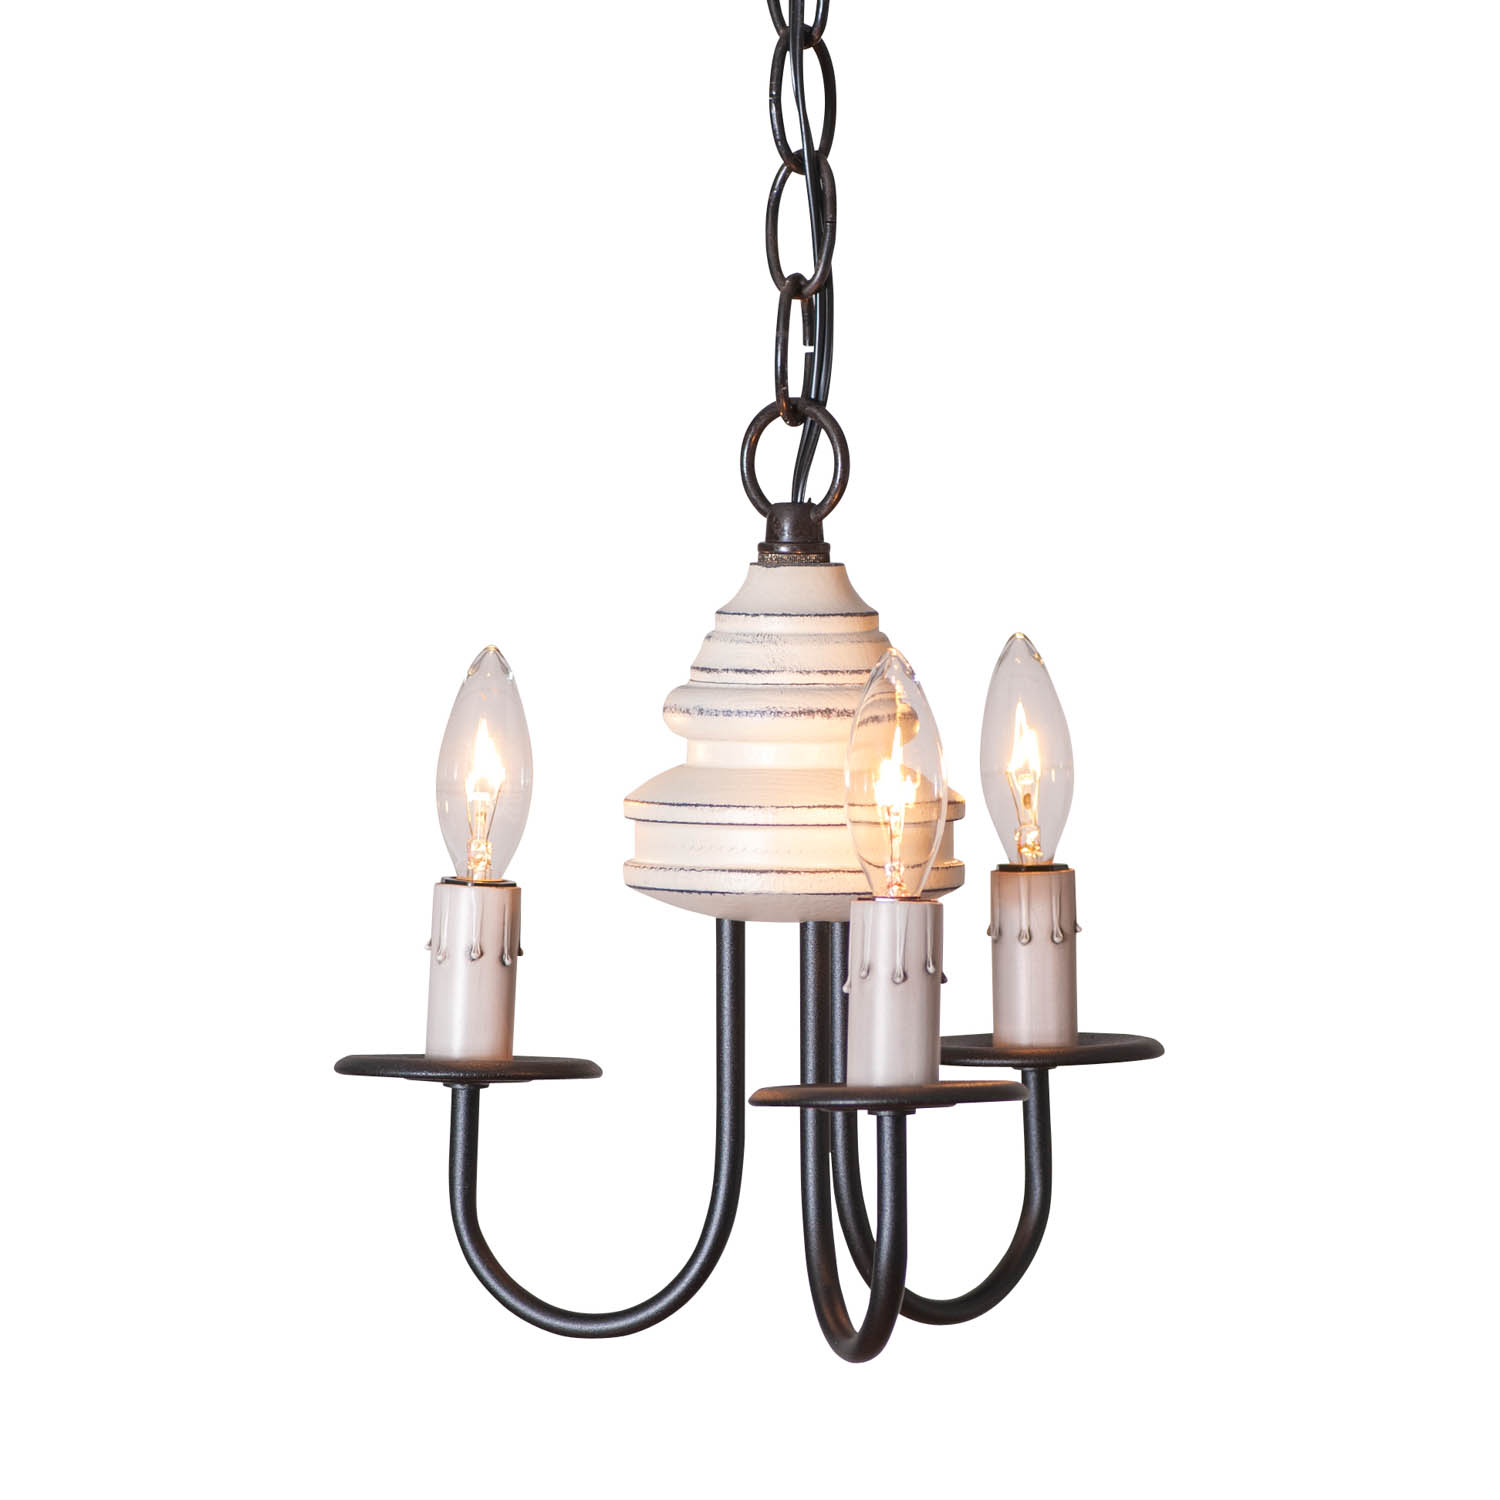 Irvins Country Tinware 3-Arm Bellview Wood Chandelier in Rustic White